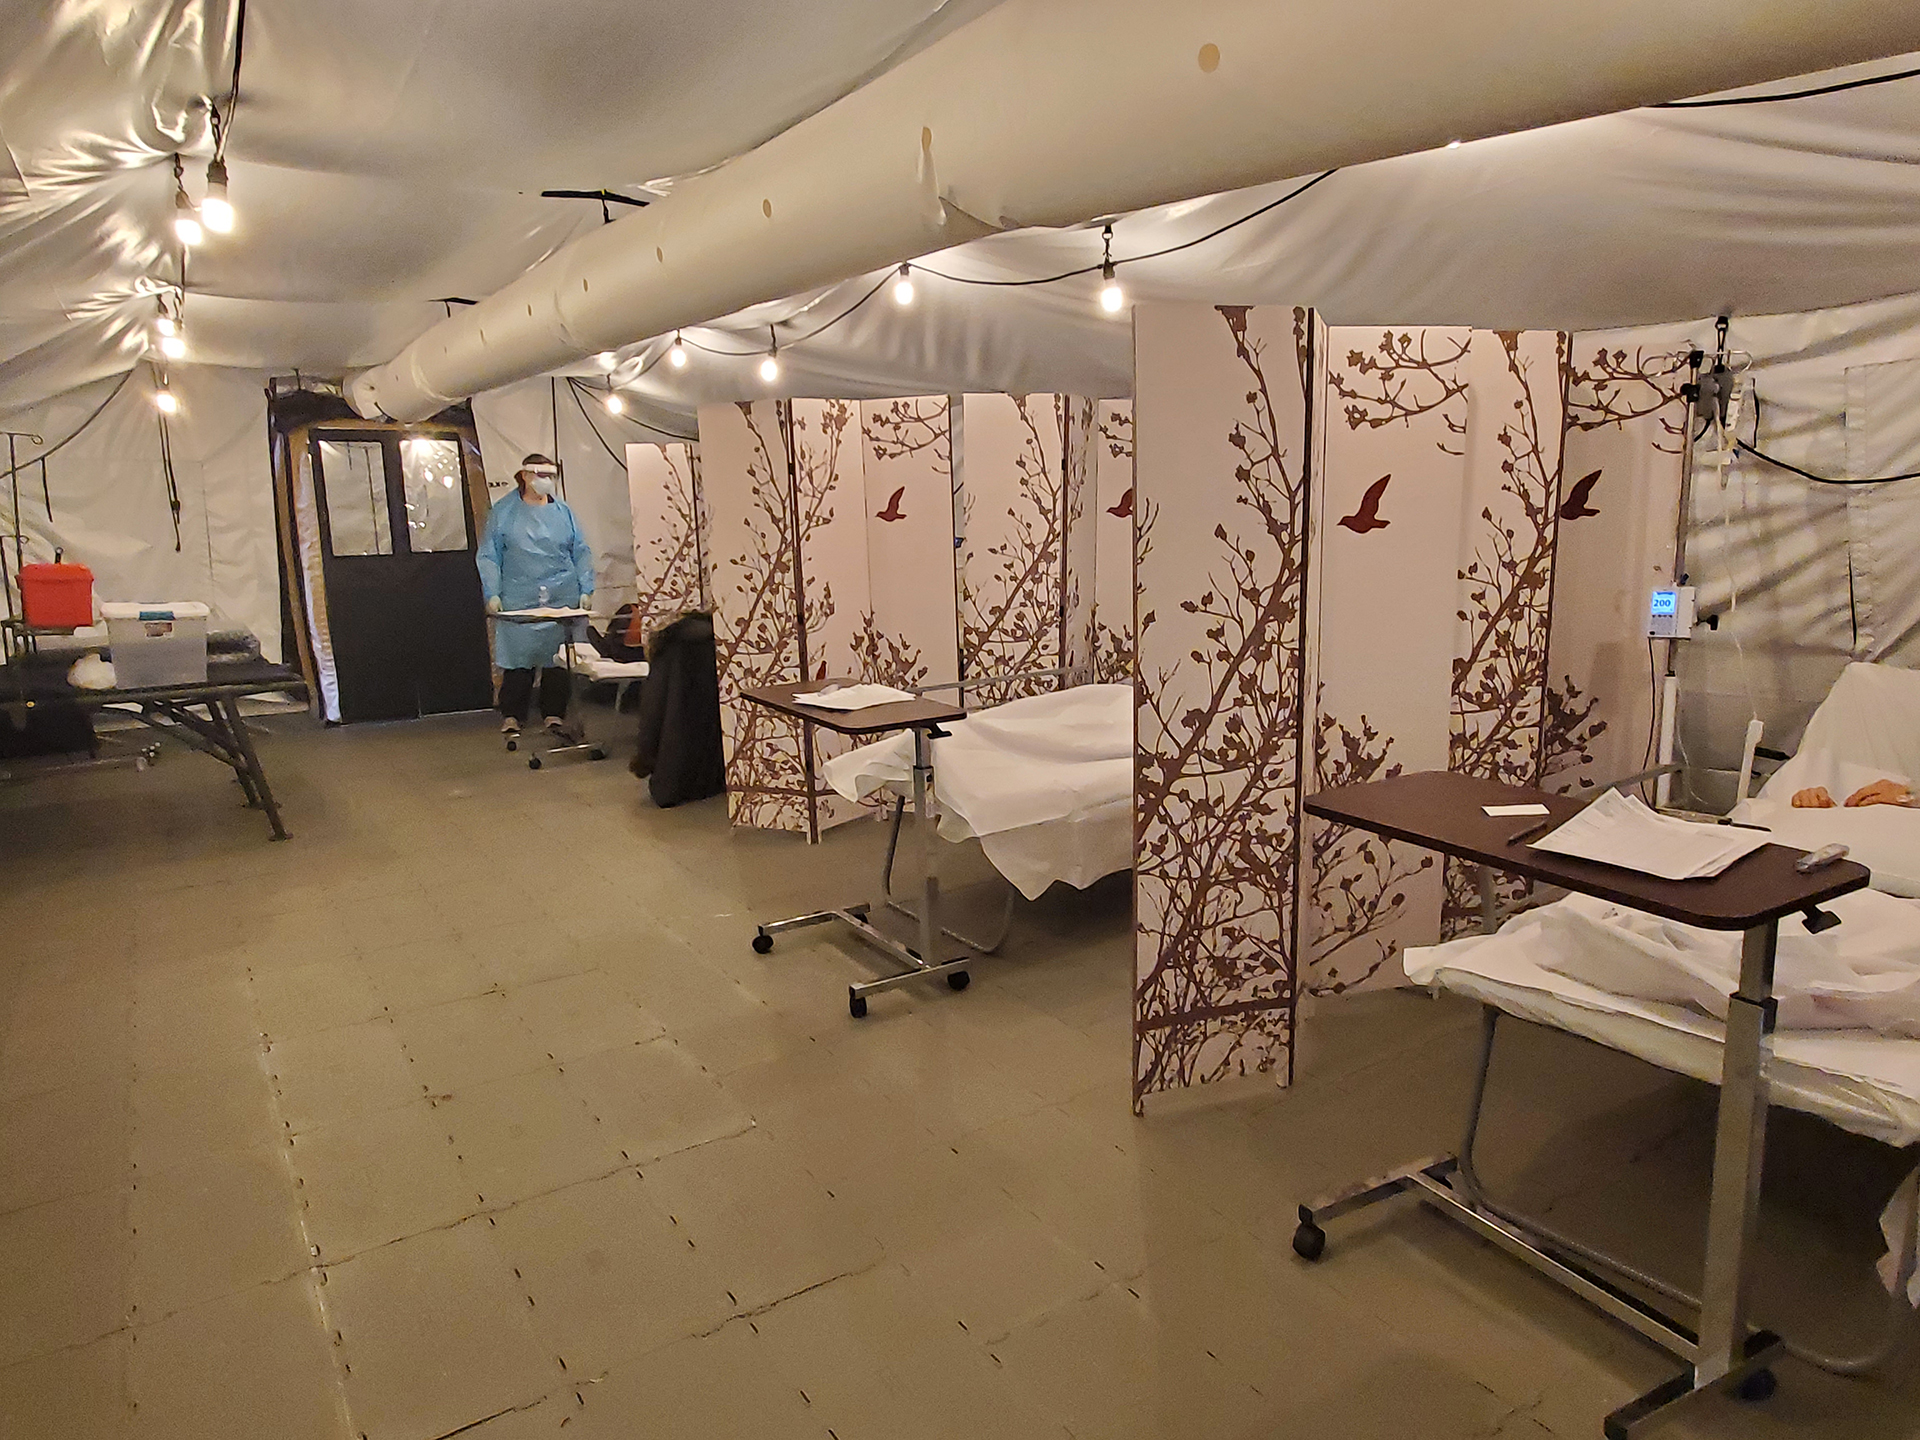 Inside the Emergency Medical Field Unit at Weiss Memorial Hospital in Chicago, Illinois.